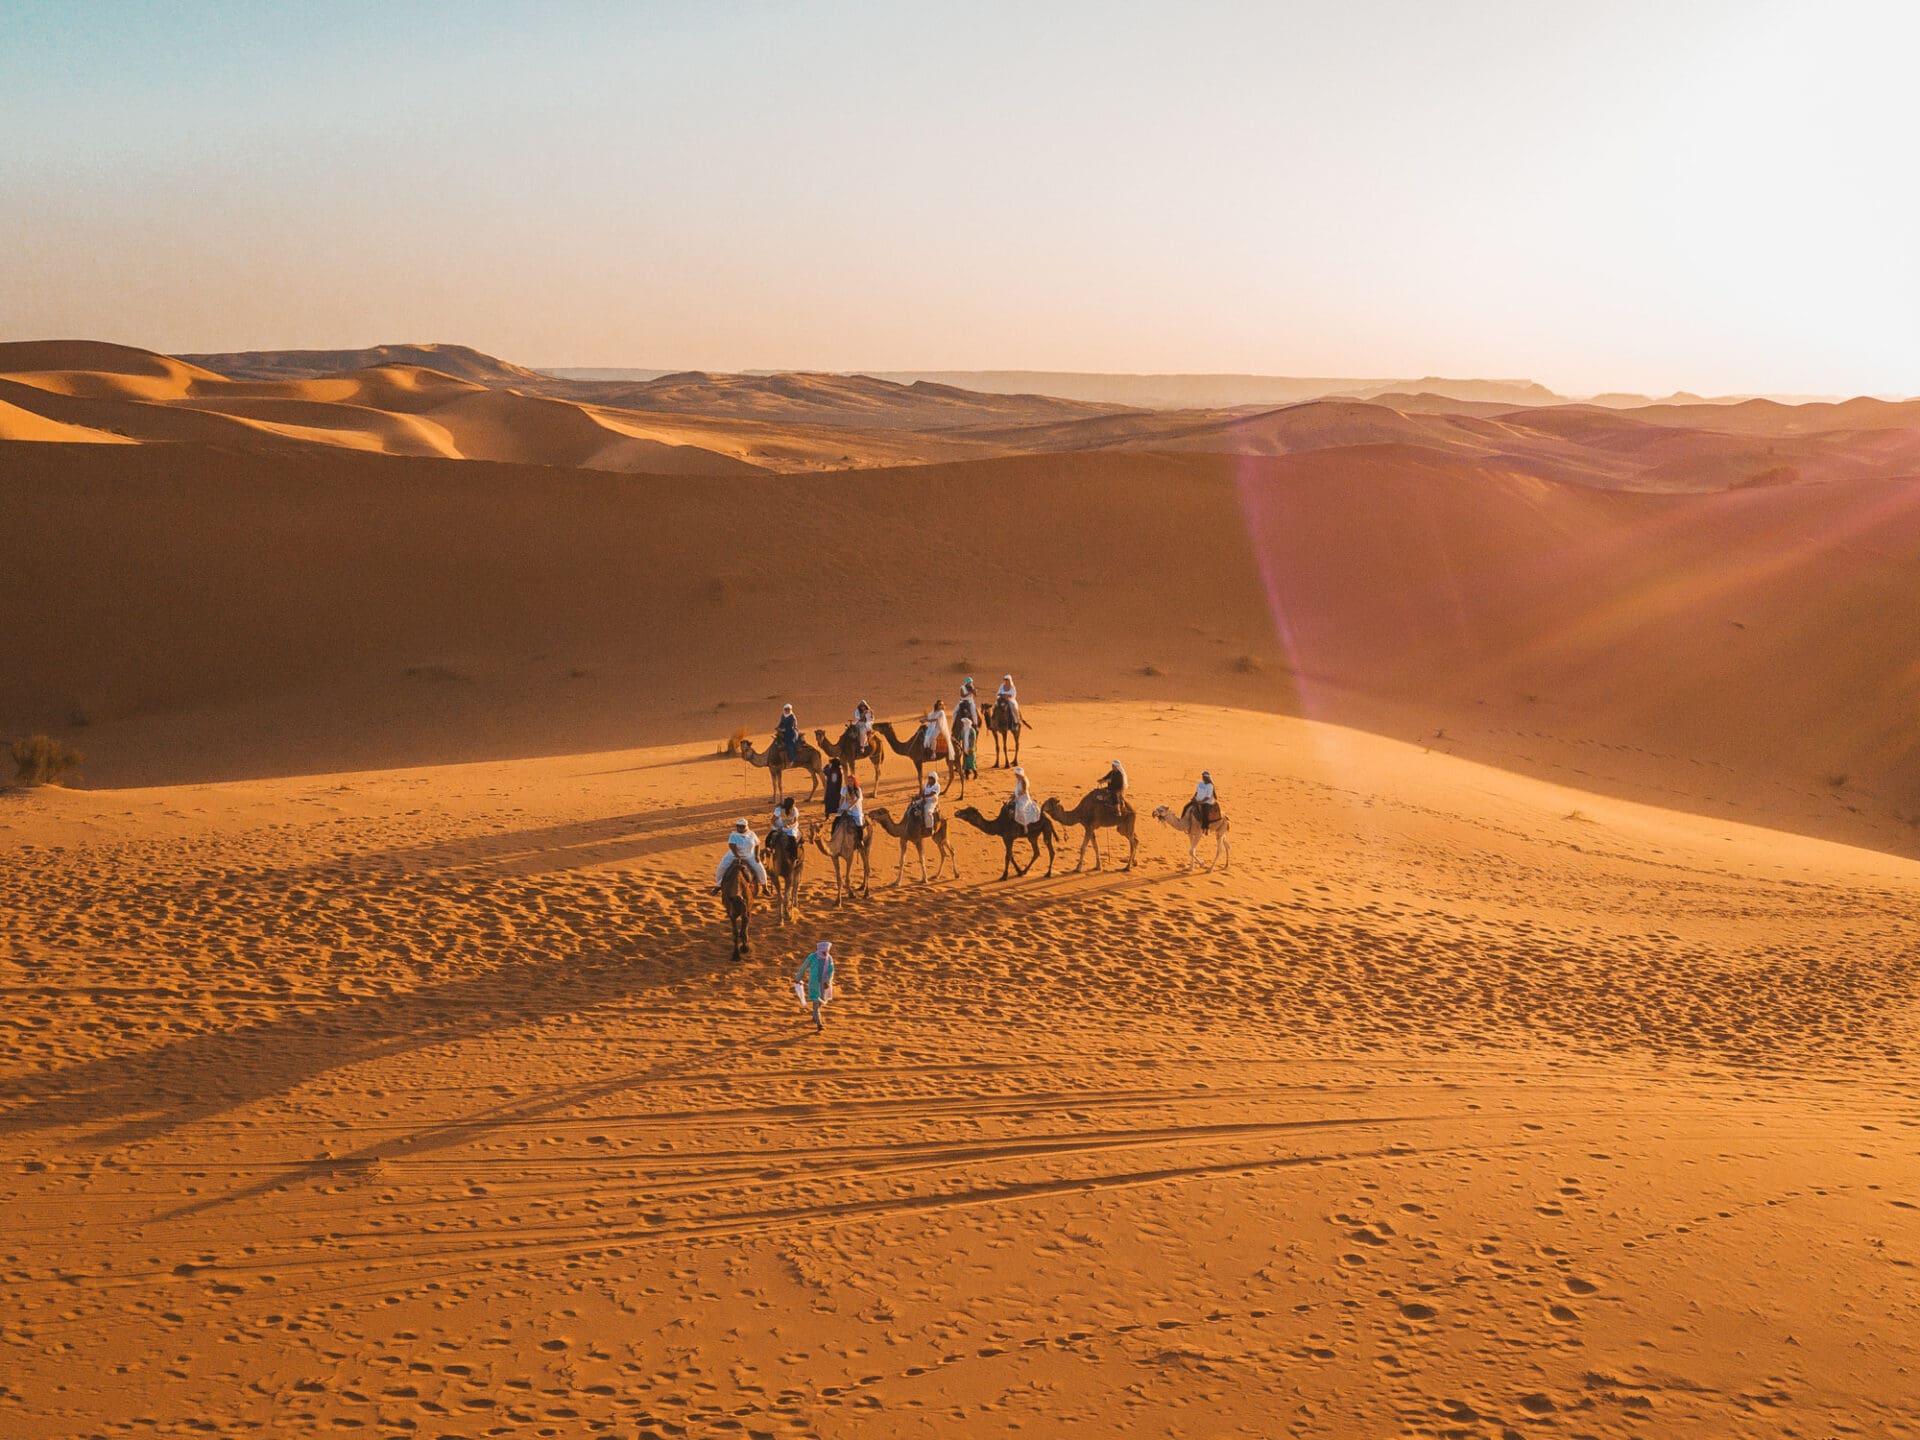 Sunset camel ride in the Sahara, Morocco